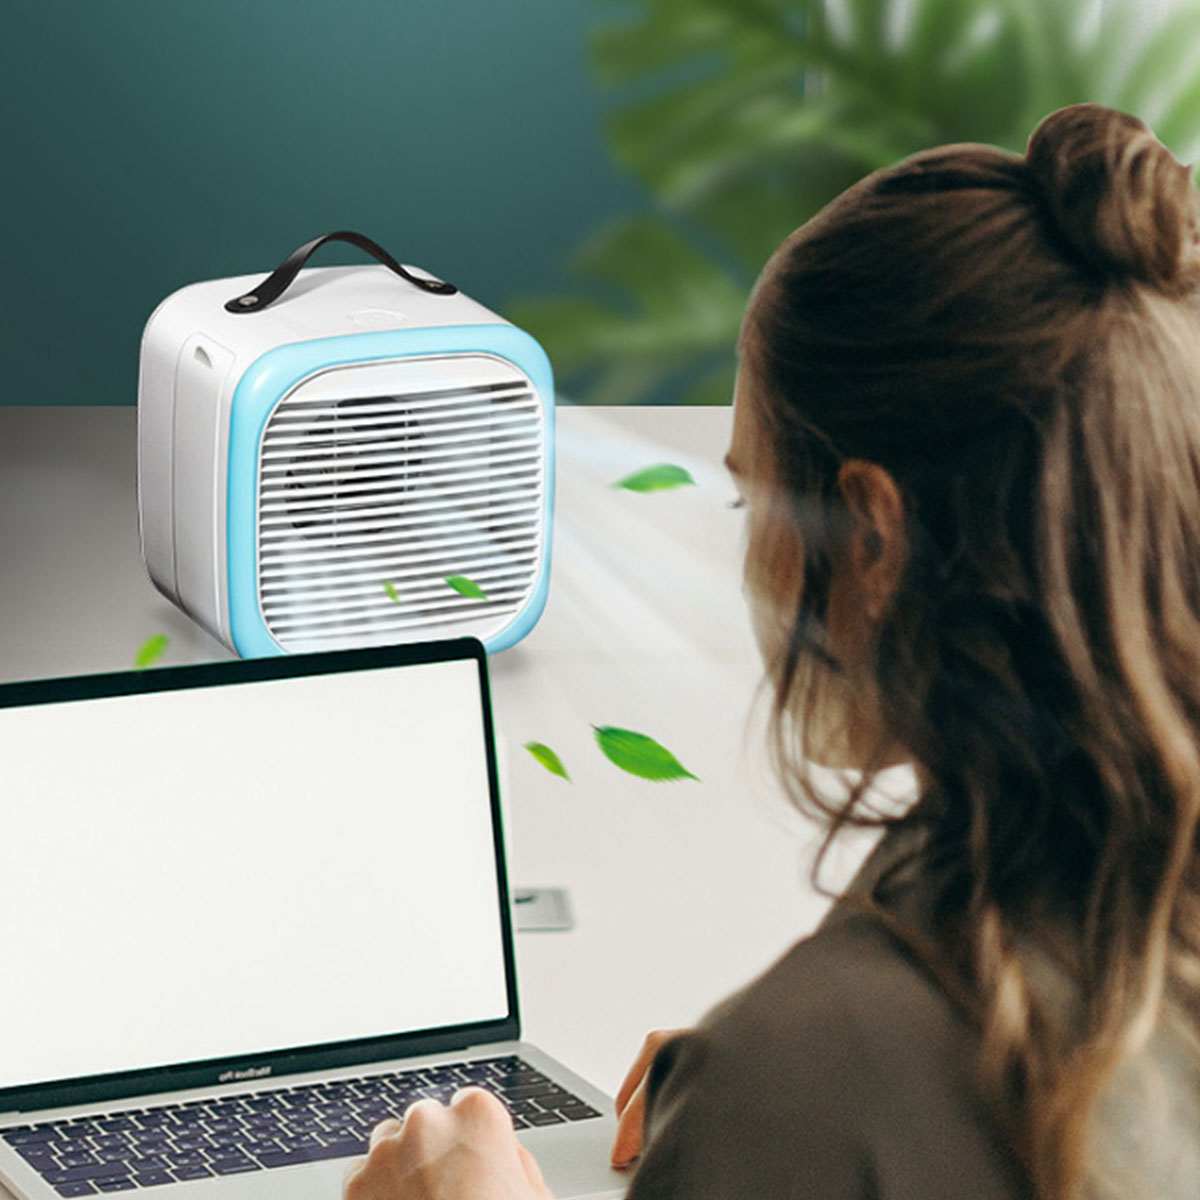 USB-Mini-Air-Conditioner-Fan-Personal-Air-Cooler-Desktop-Cooling-Fan-Air-Purifier-Humidifier-for-Hom-1783906-10